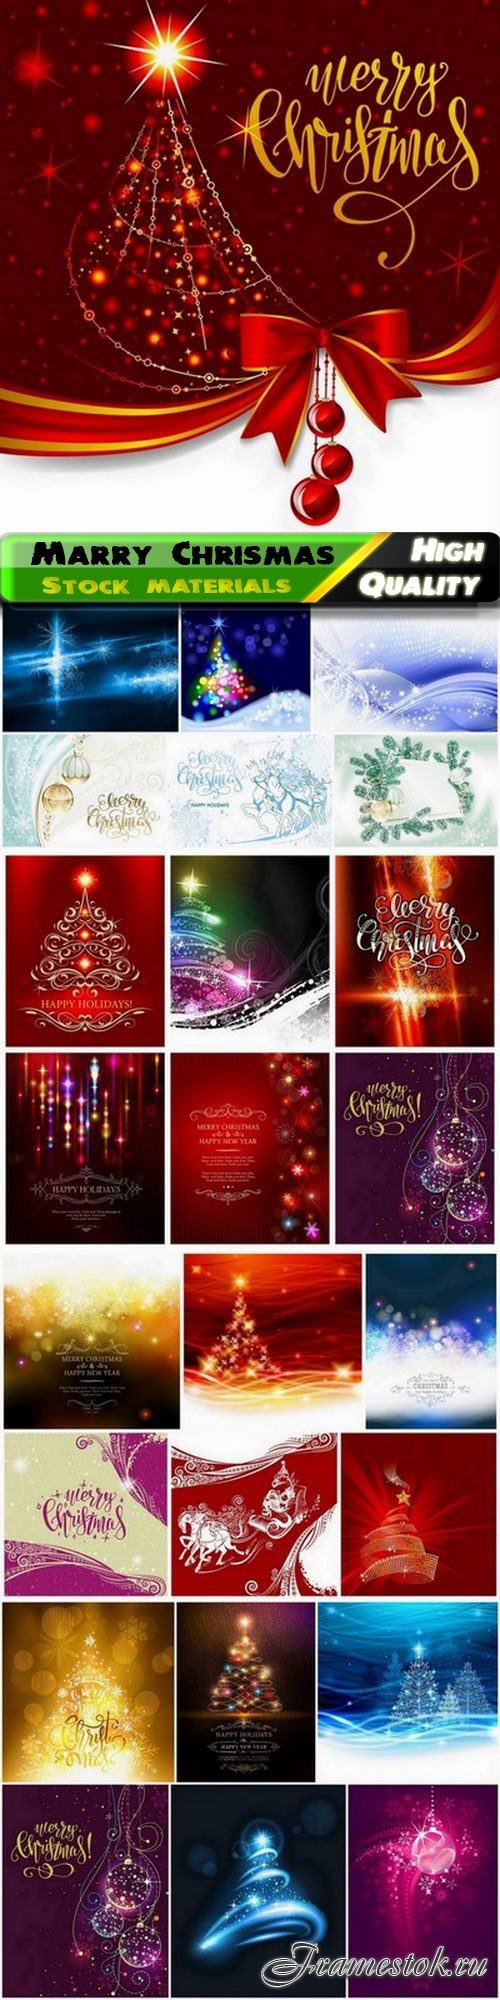 Merry Christmas and  happy New Year holiday card - 25 Eps